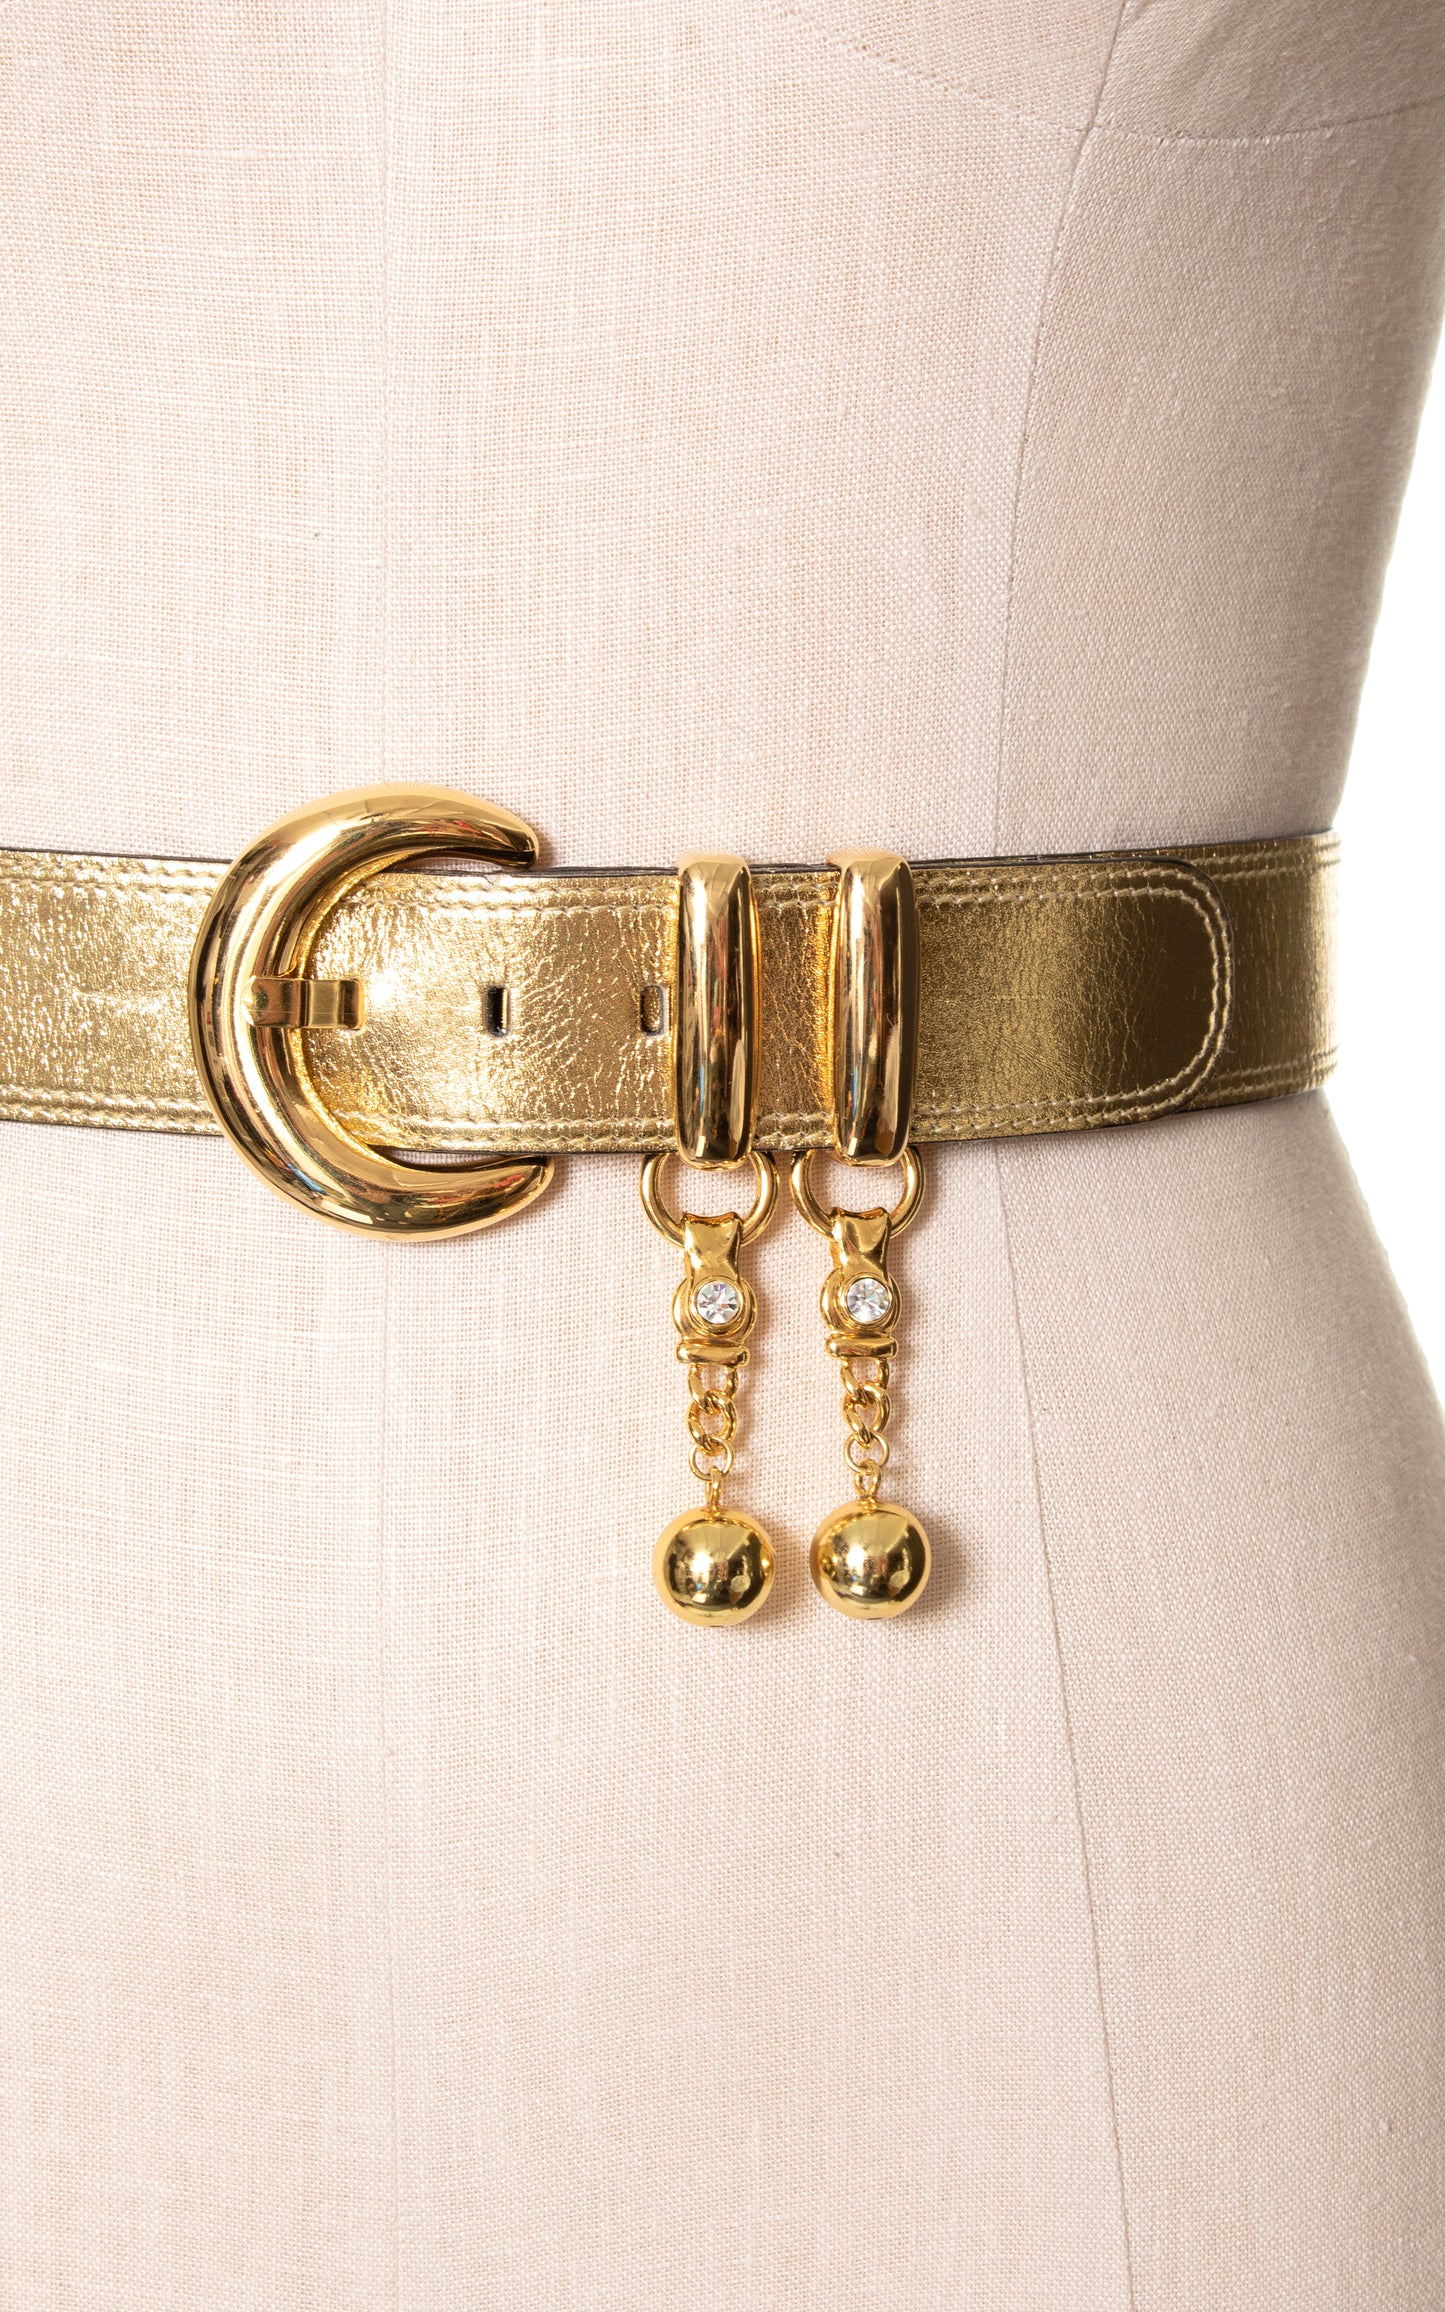 1980s ESCADA Gold Leather Cinch Belt with Charms | large/x-large